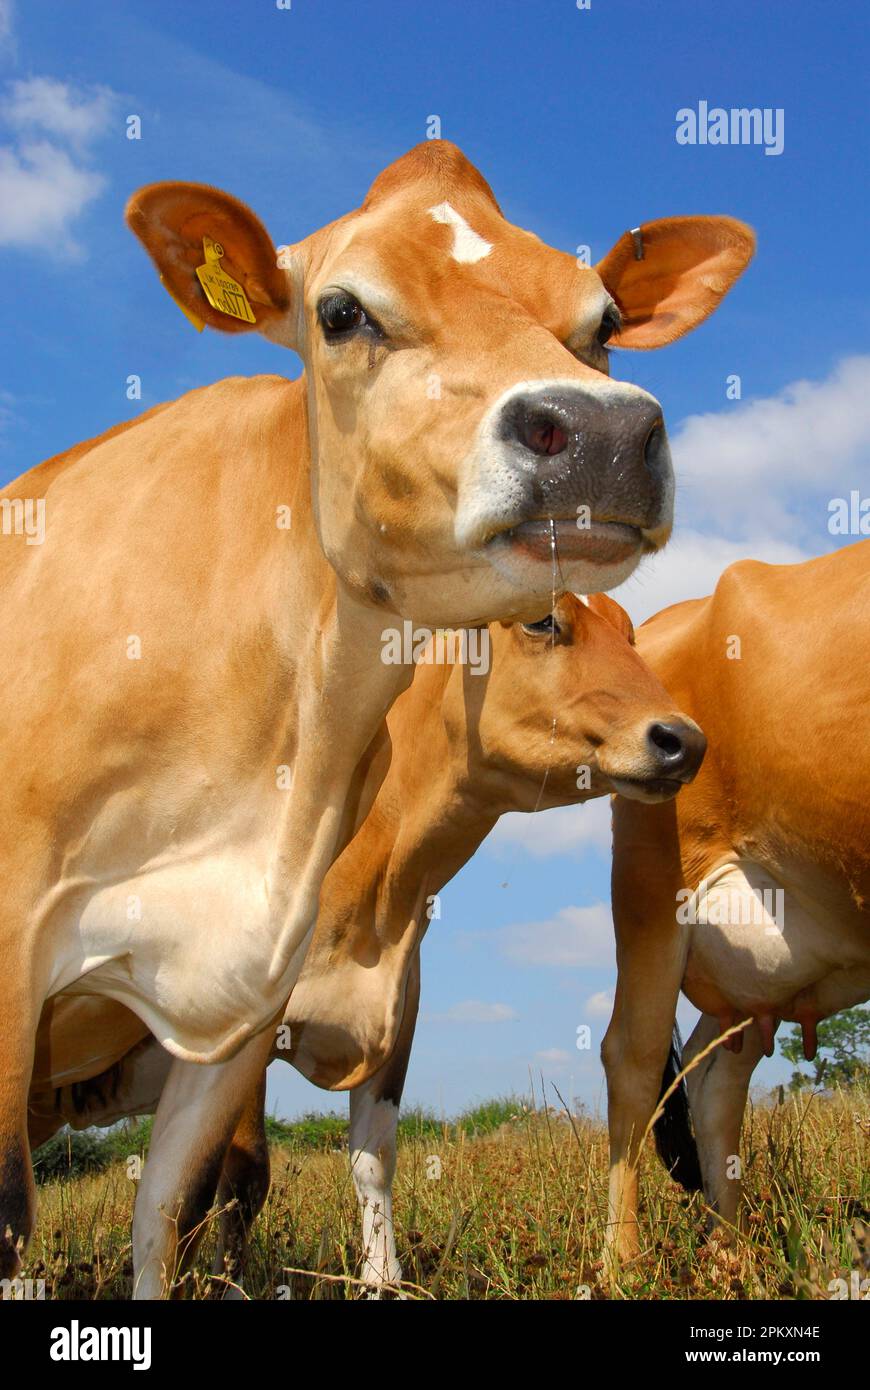 Domestic cattle, Jersey cows, standing herd in field, Wolverhampton, West Midlands, England, Great Britain Stock Photo